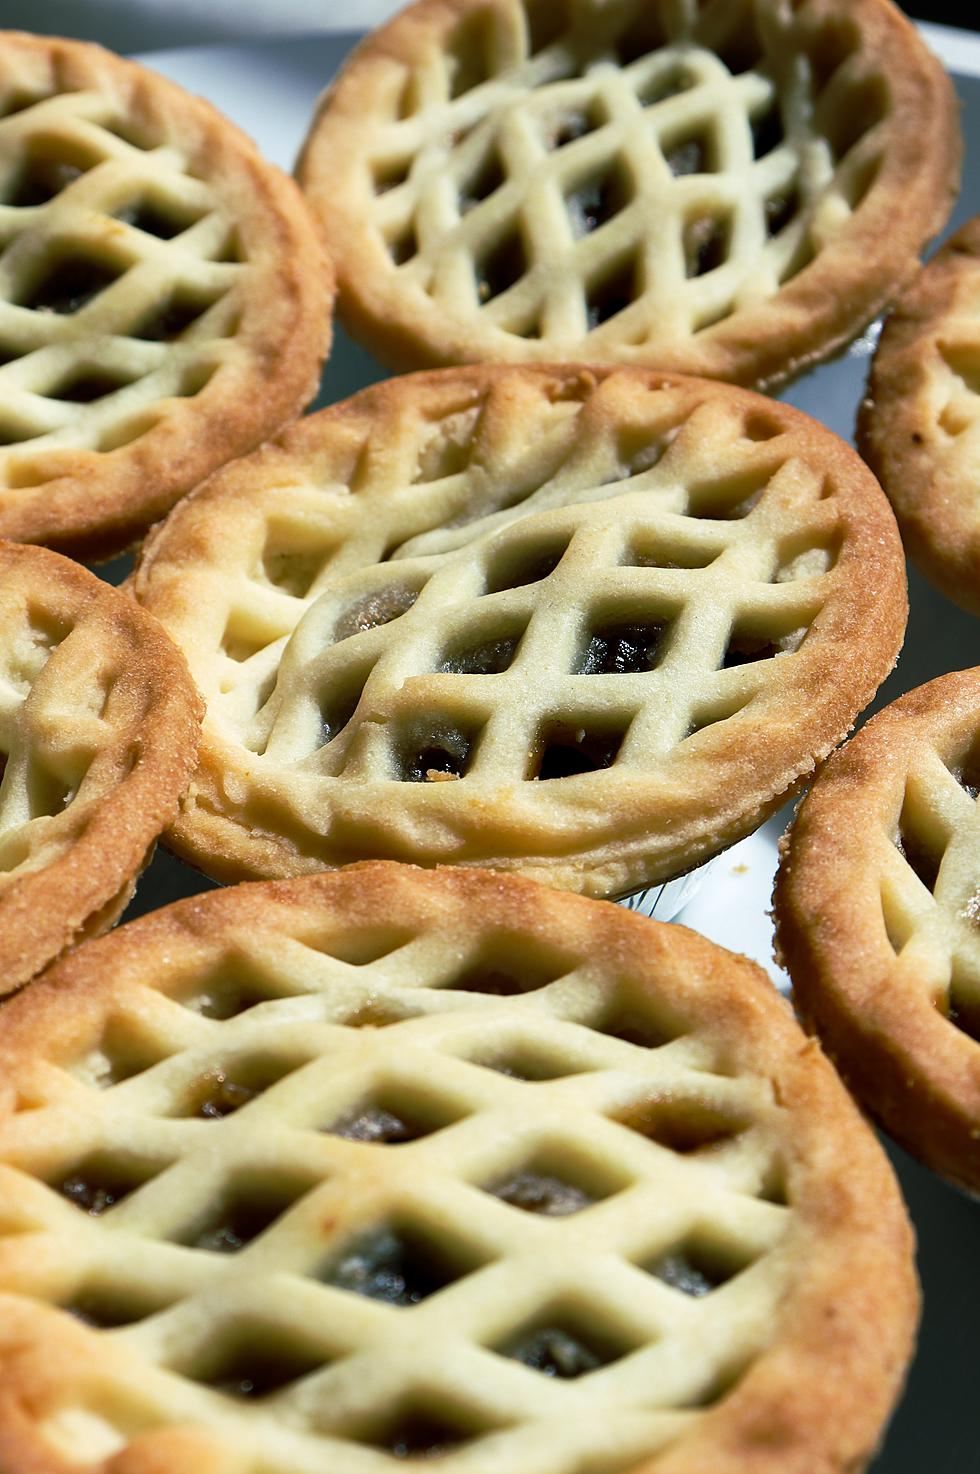 Top 25 Spots That Make Delicious Holiday Pies At The Jersey Shore